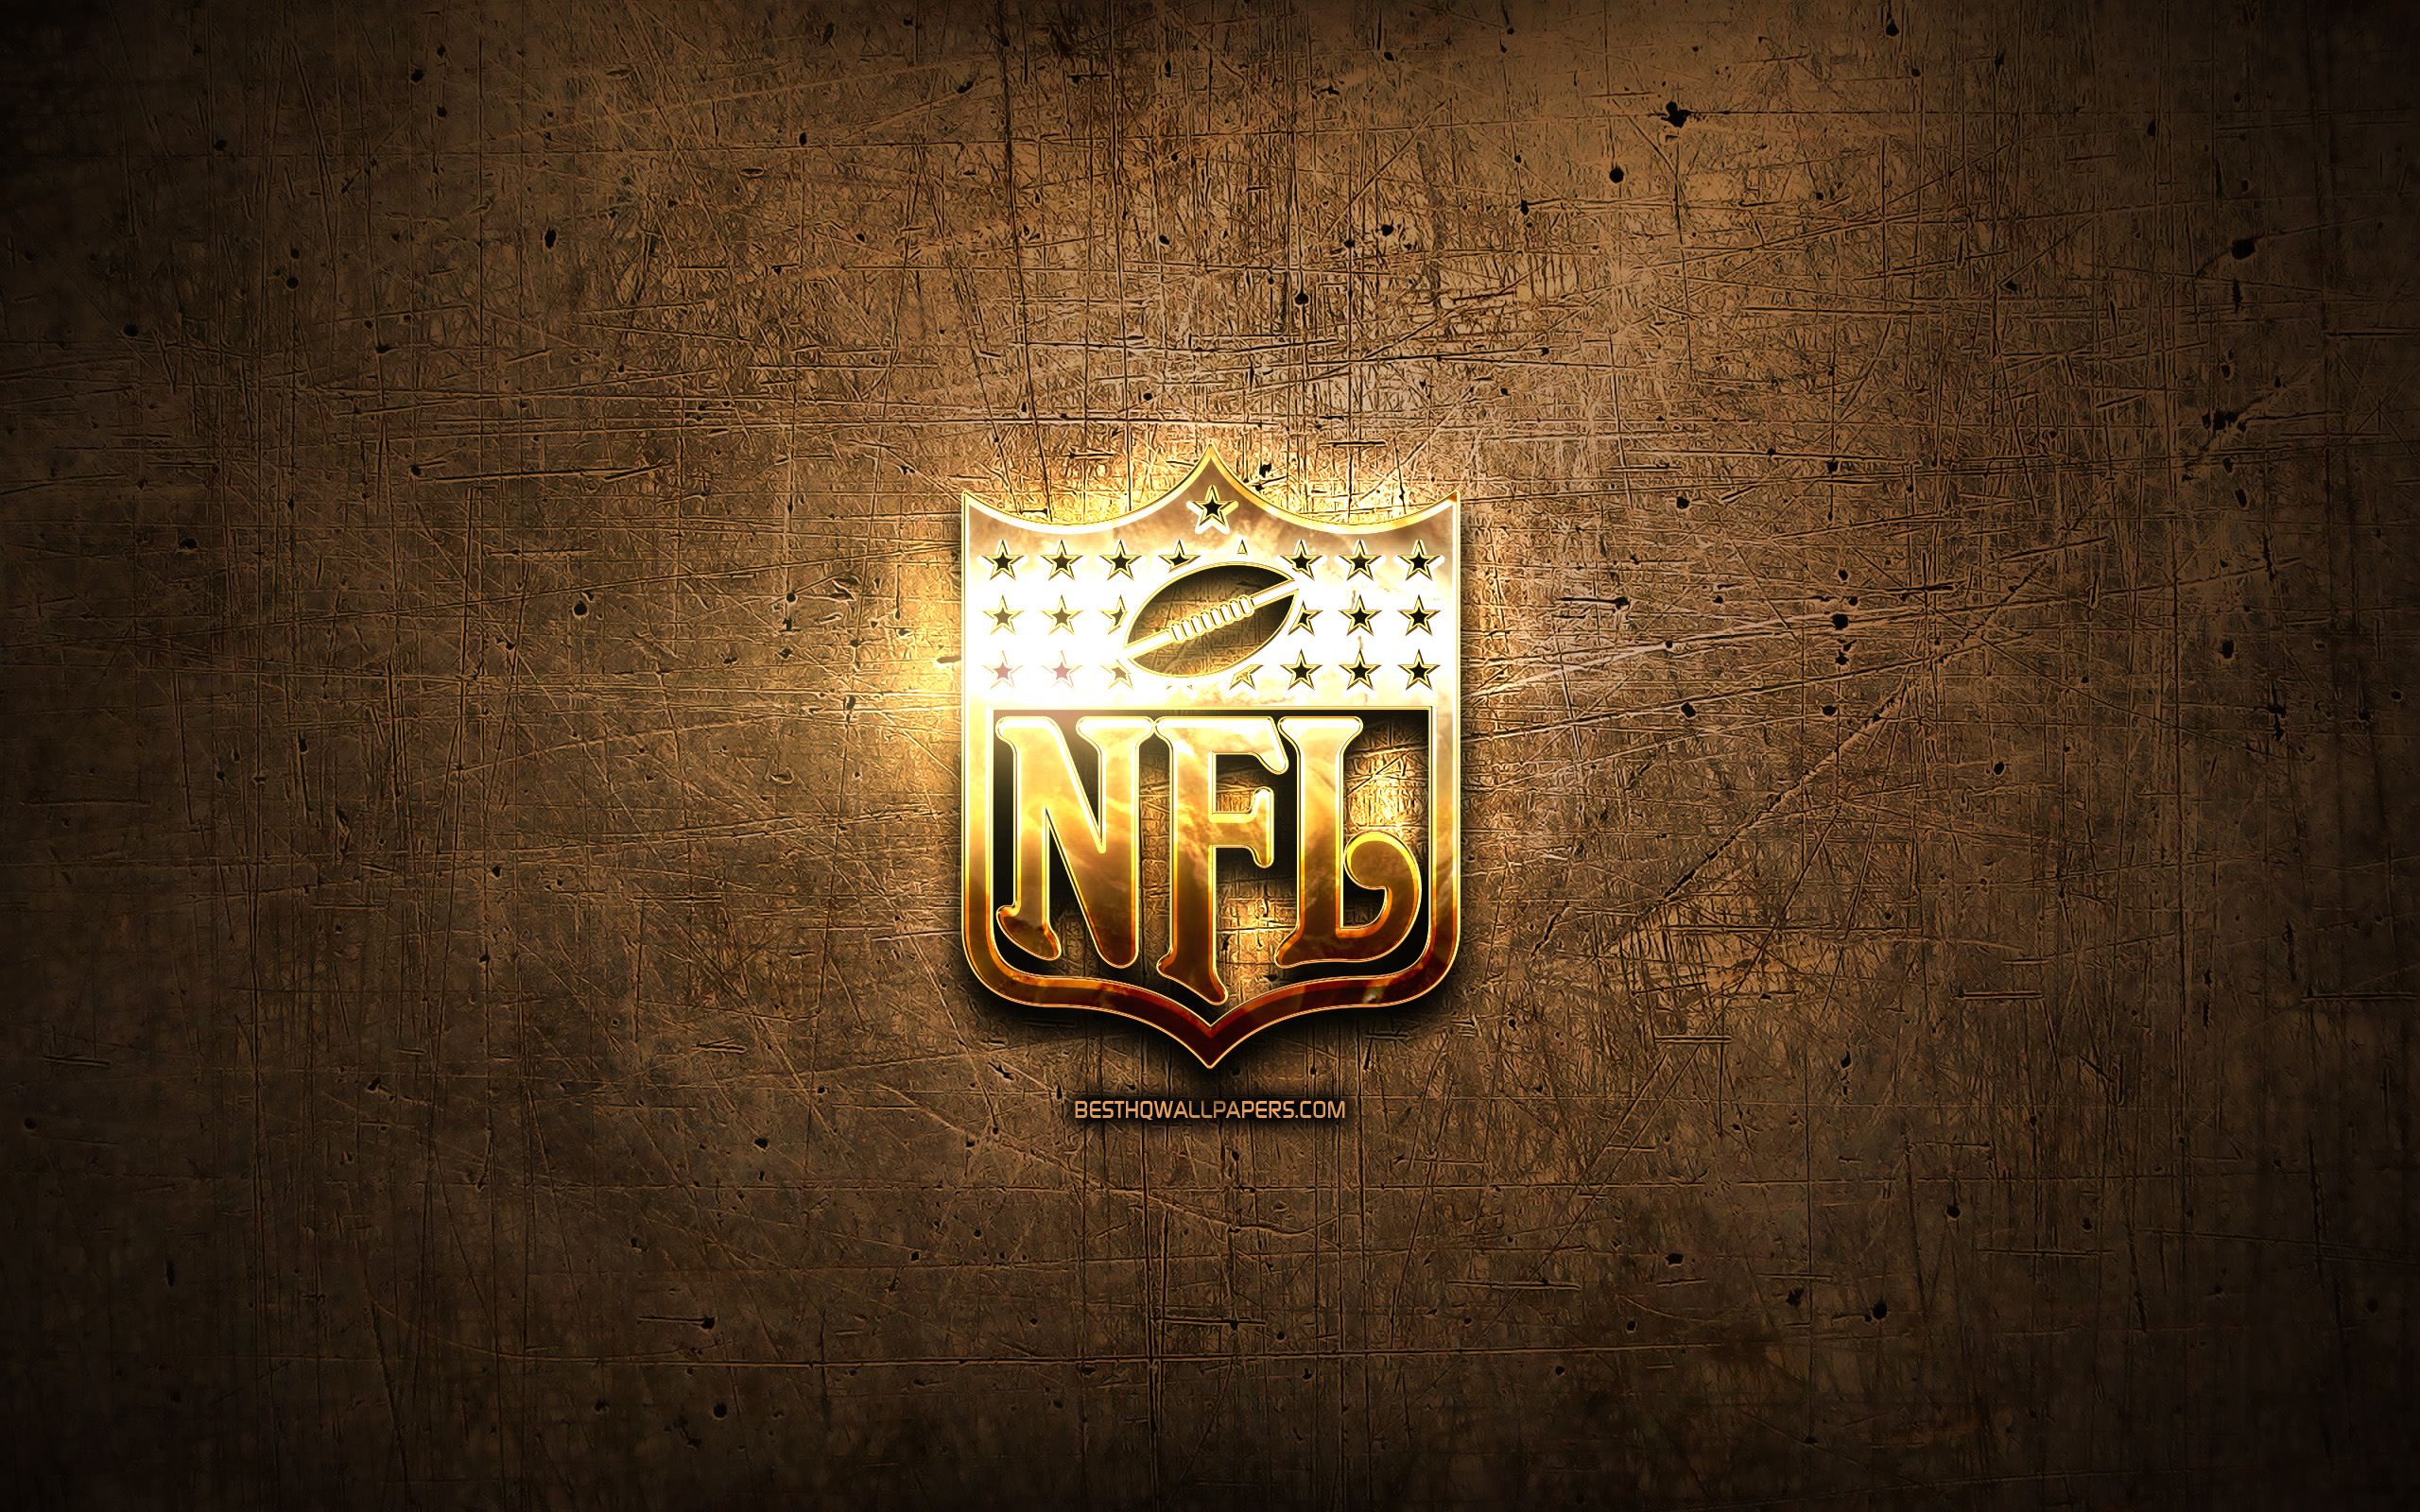 Download wallpaper NFL golden logo, football leagues, artwork, National Football League, brown metal background, creative, NFL logo, brands, NFL for desktop with resolution 2560x1600. High Quality HD picture wallpaper